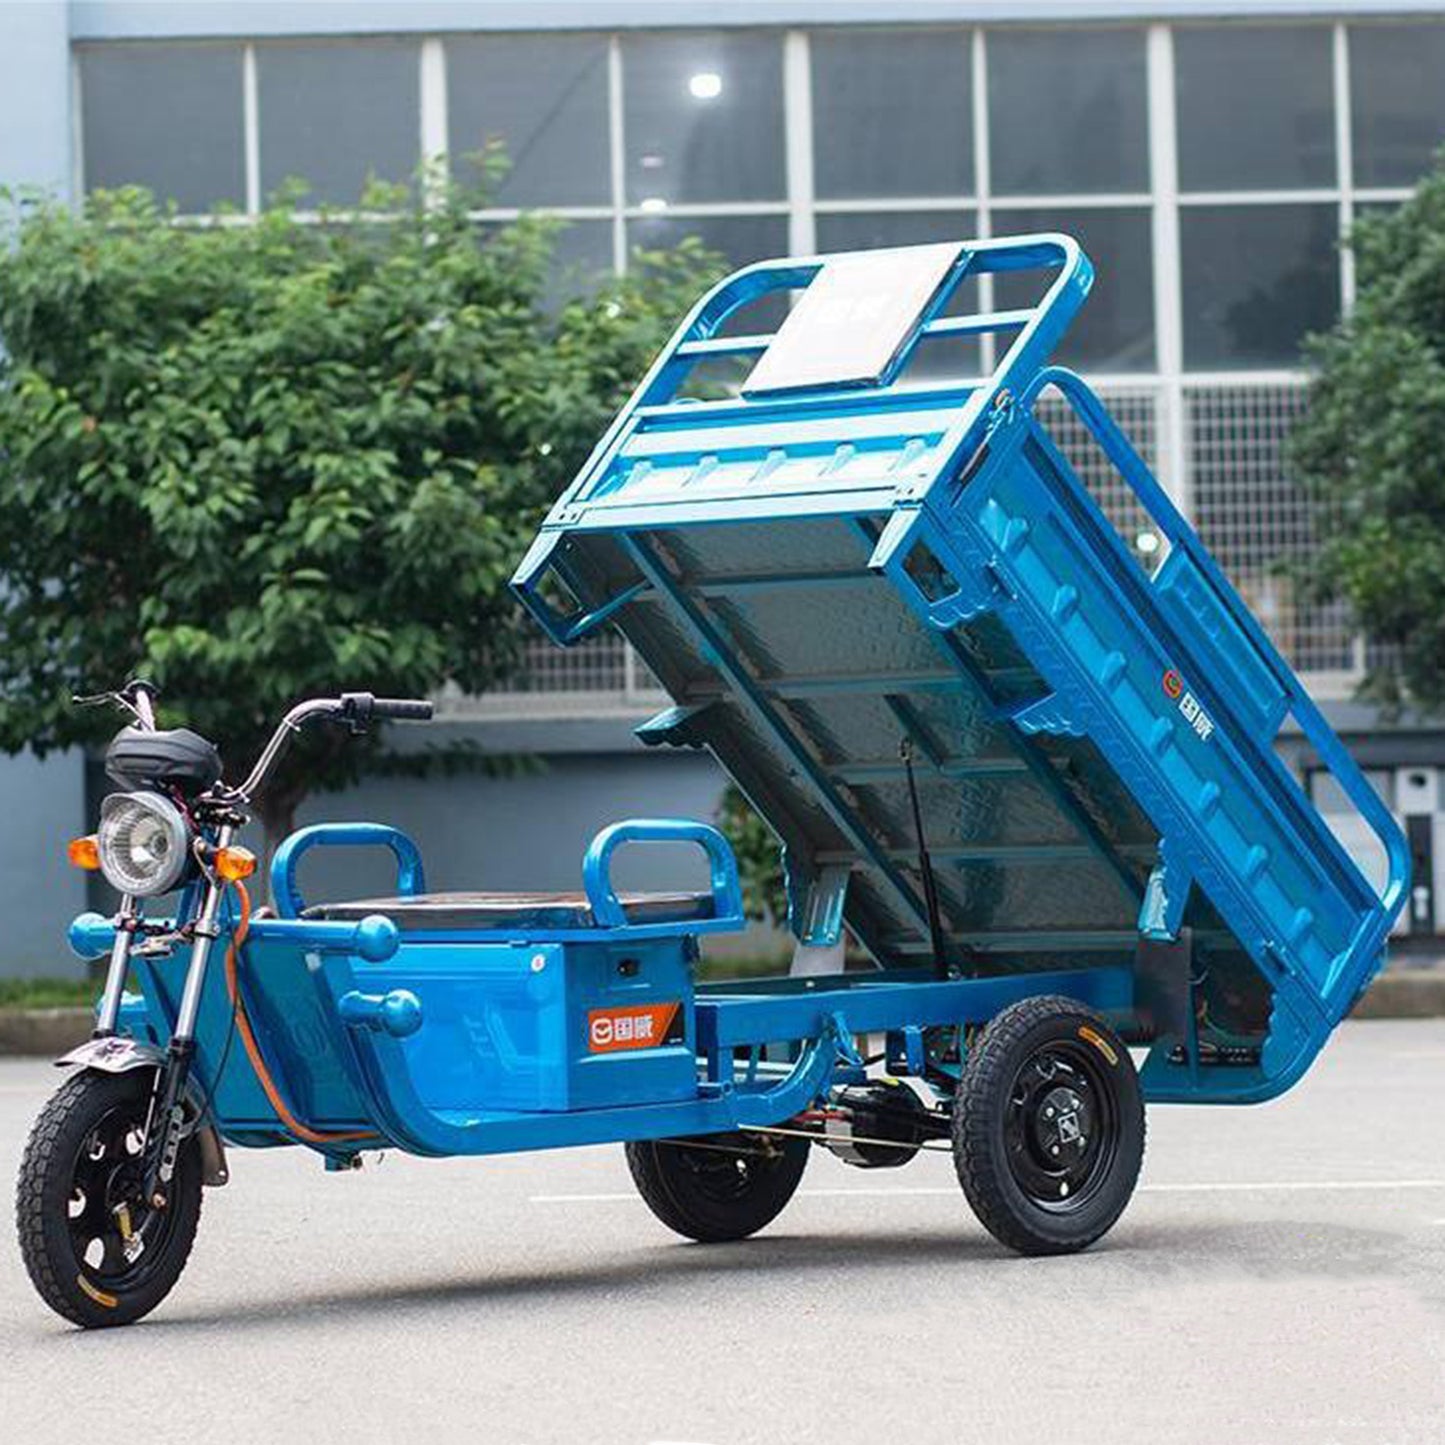 1200W Motor 60V 45Ah Lead Acid Battery Electric Cargo Tricycle For Adult